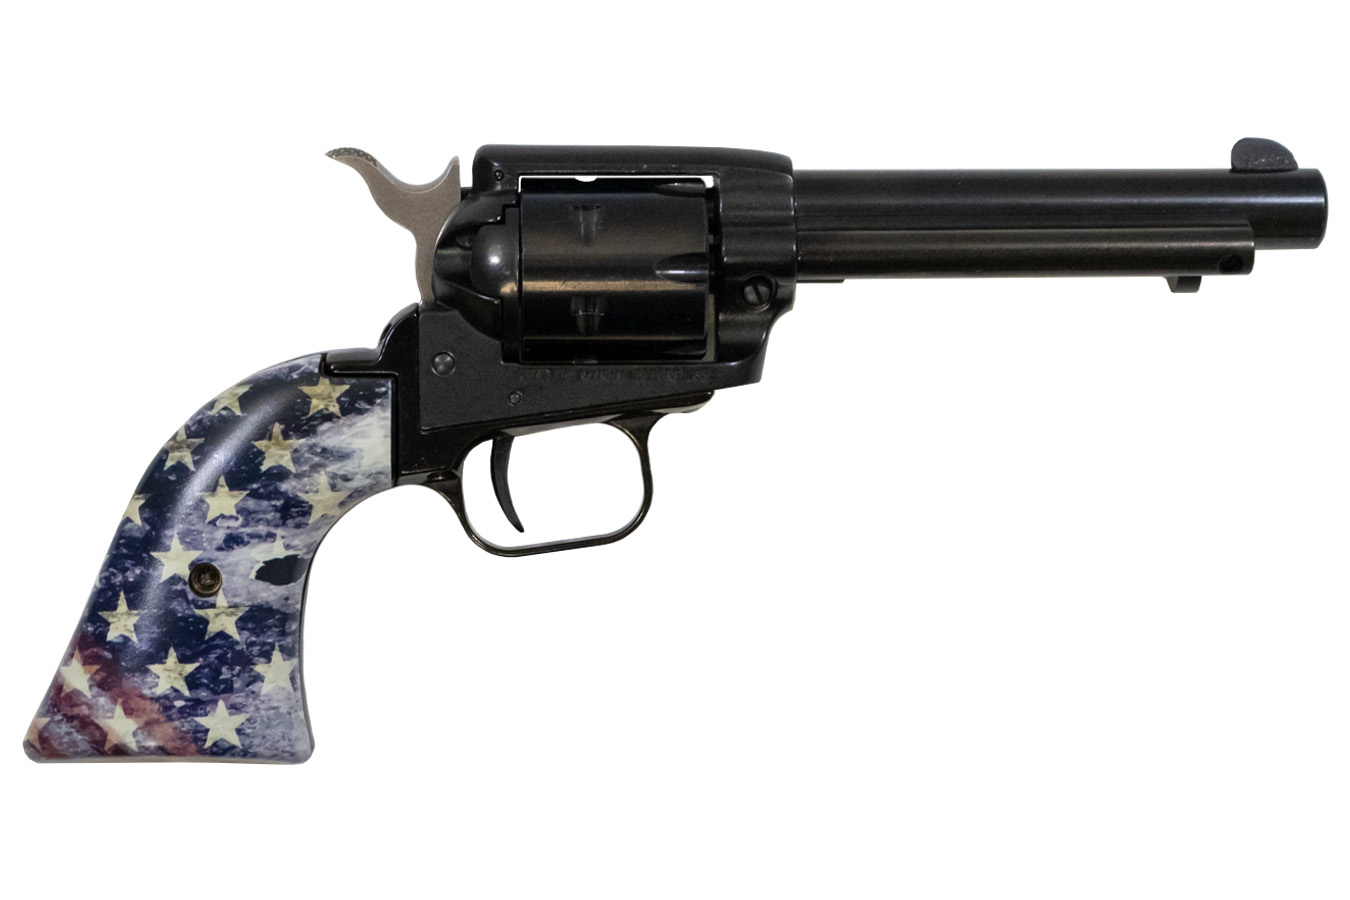 No. 15 Best Selling: HERITAGE ROUGH RIDER 22LR WITH AMERICAN FLAG GRIPS